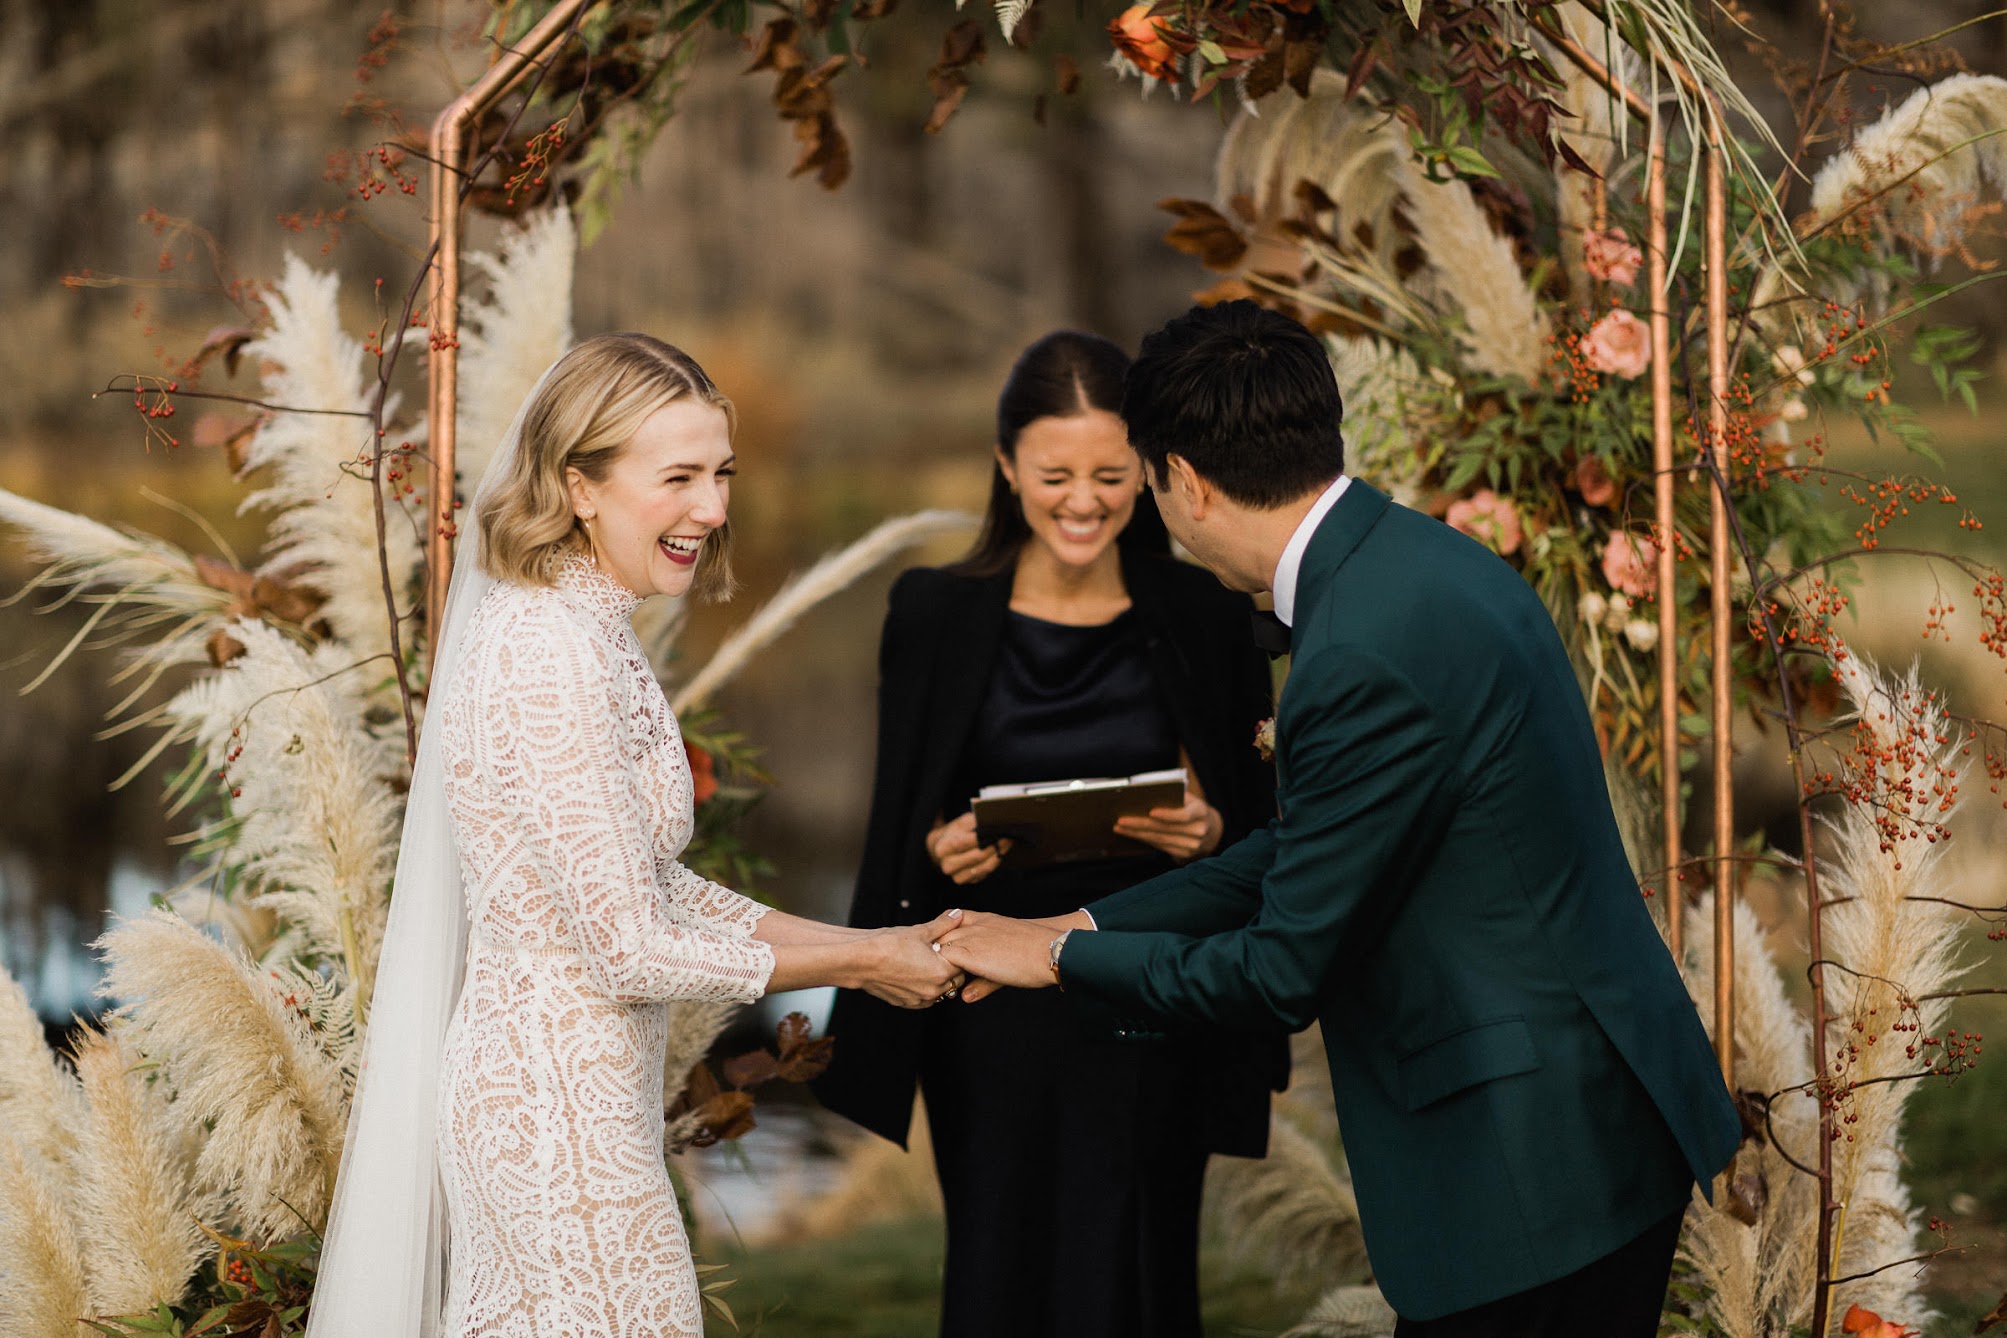 The bride, groom and officiant sharing a laugh at the arbor while the bride and groom hold hands.